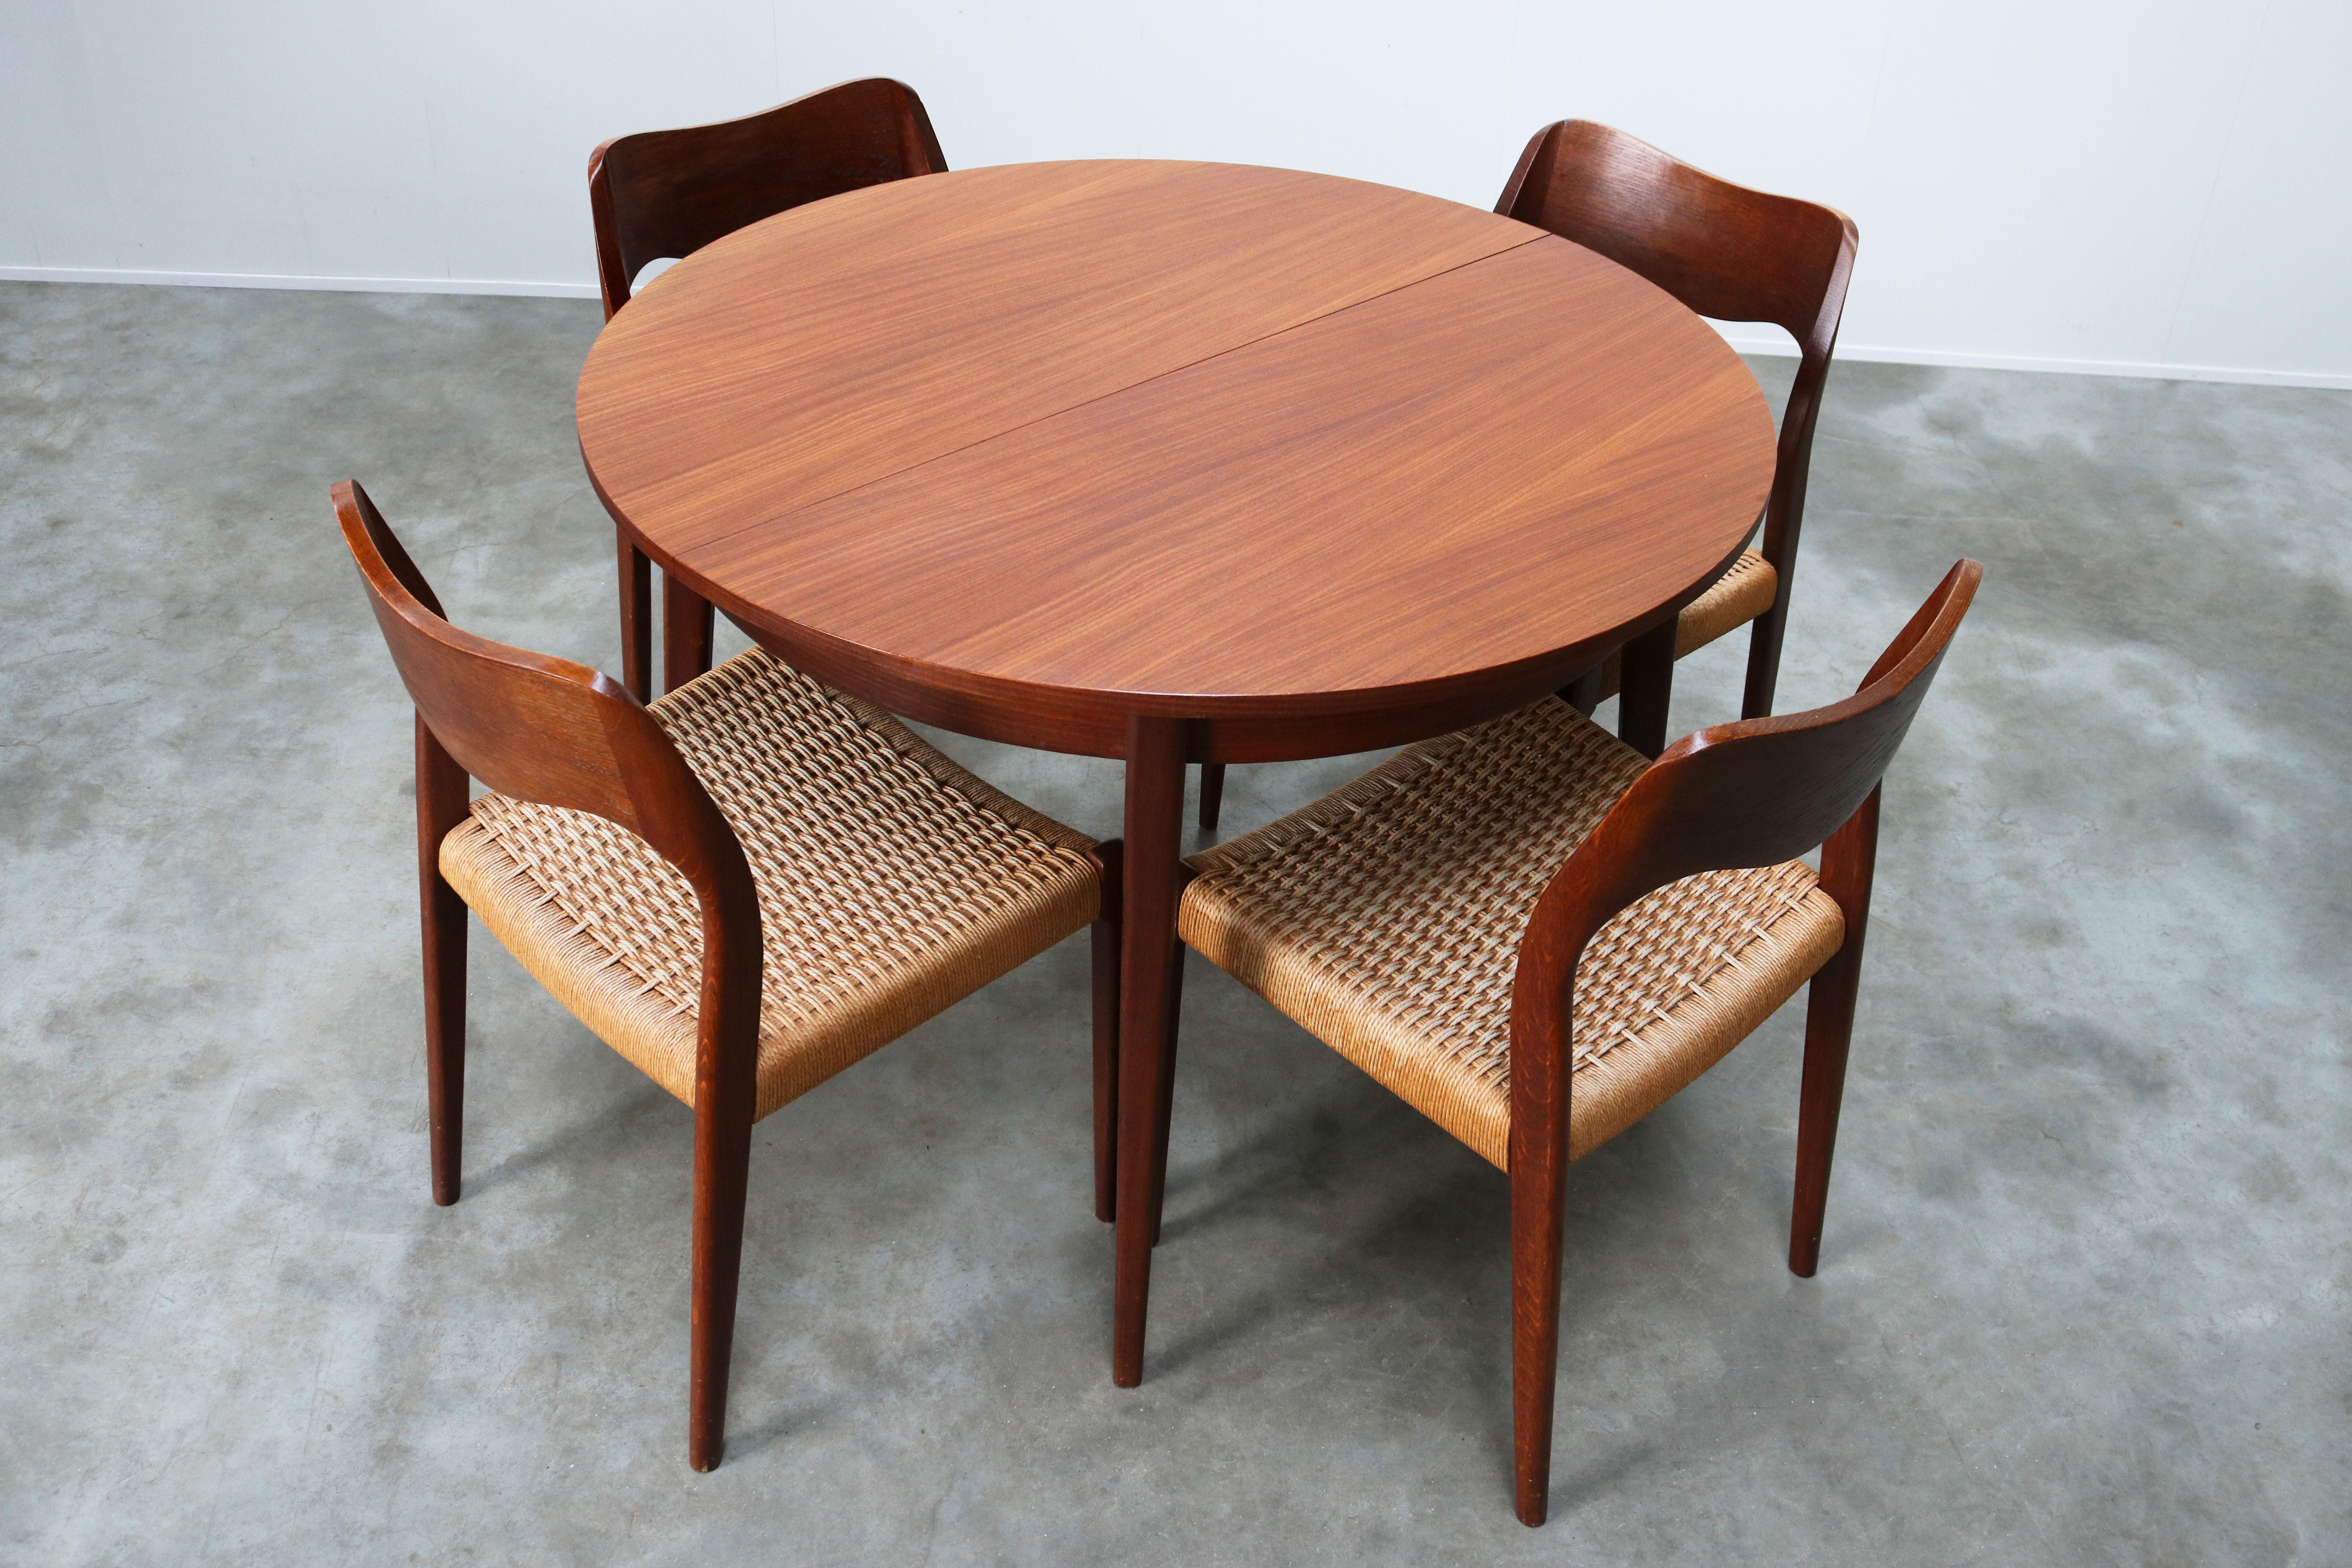 Magnificent Danish dining room set by Niels Otto Moller for JL Moller Mobelfabrik, 1950. The set consists of four teak and papercord model.71 chairs and a matching round teak table (extendable). Set is in wonderful original condition, small traces